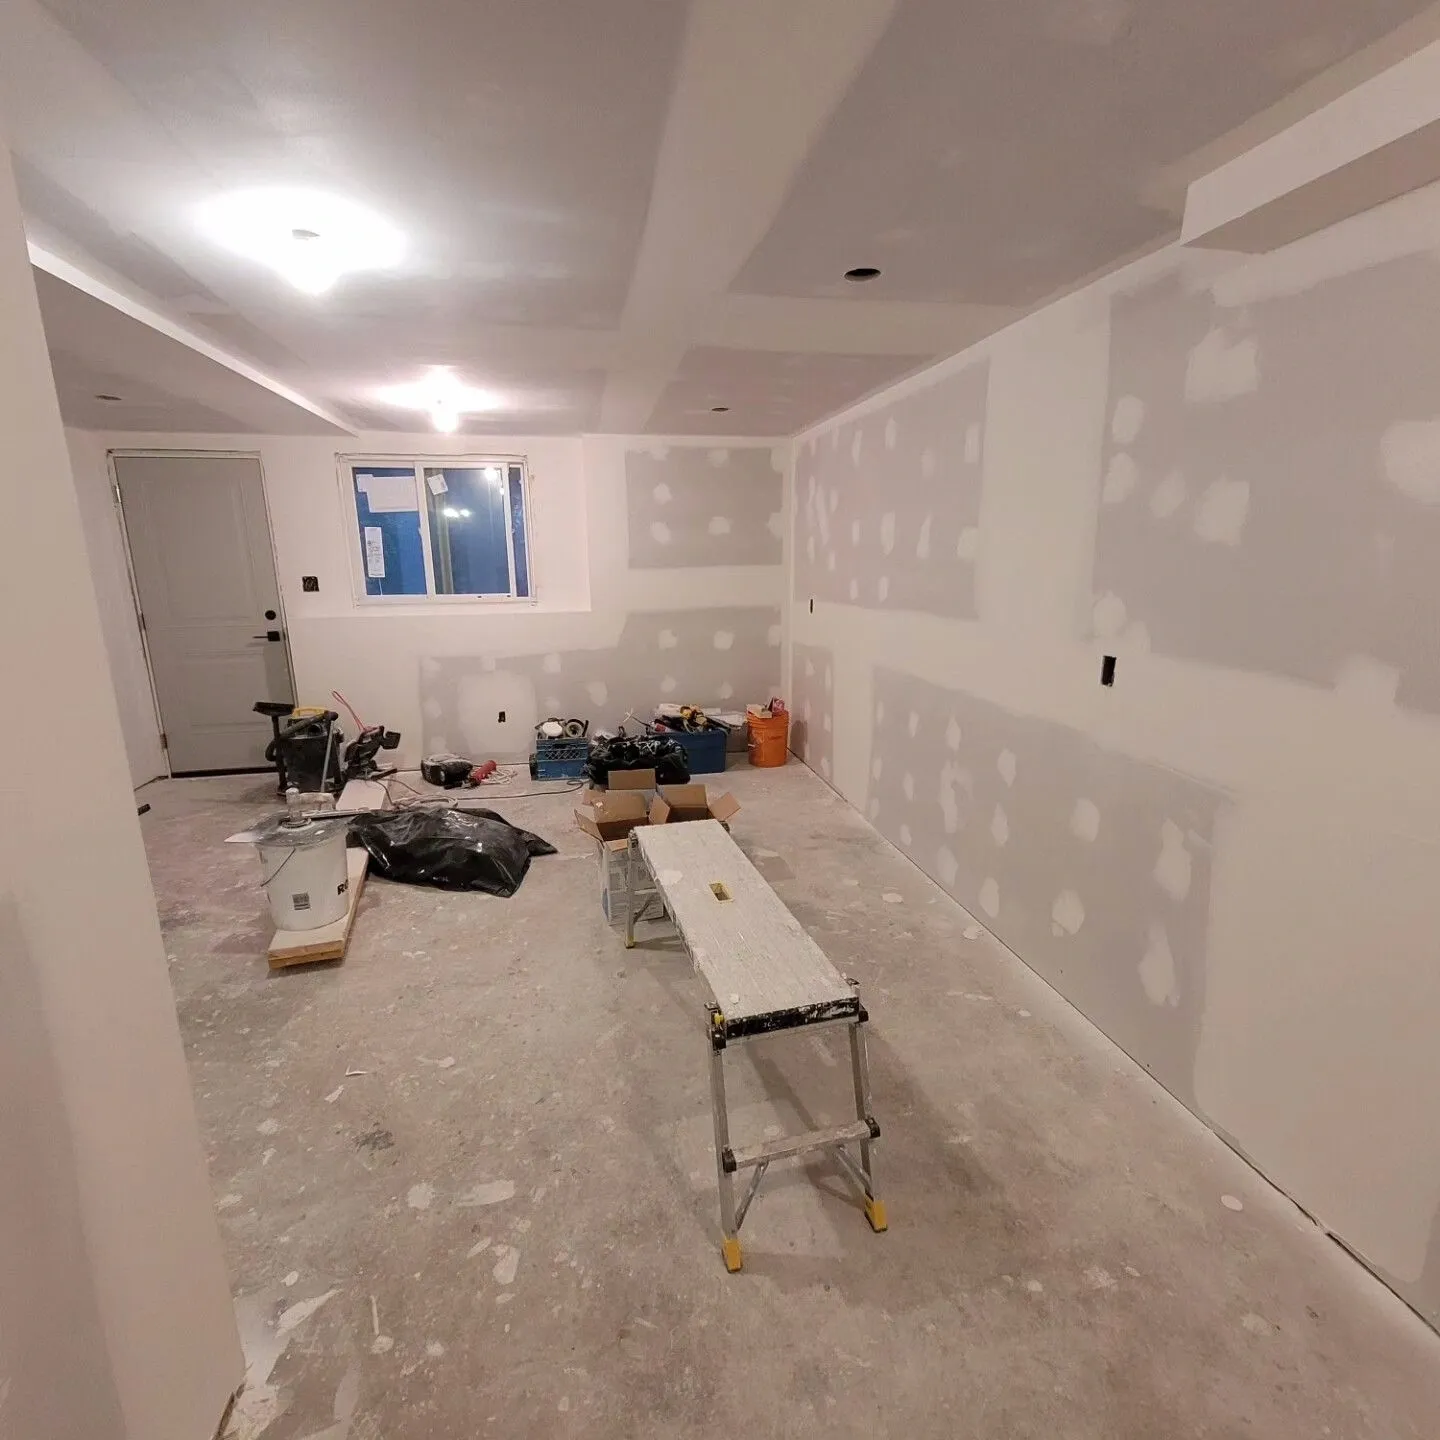 A room with walls and floors being remodeled.